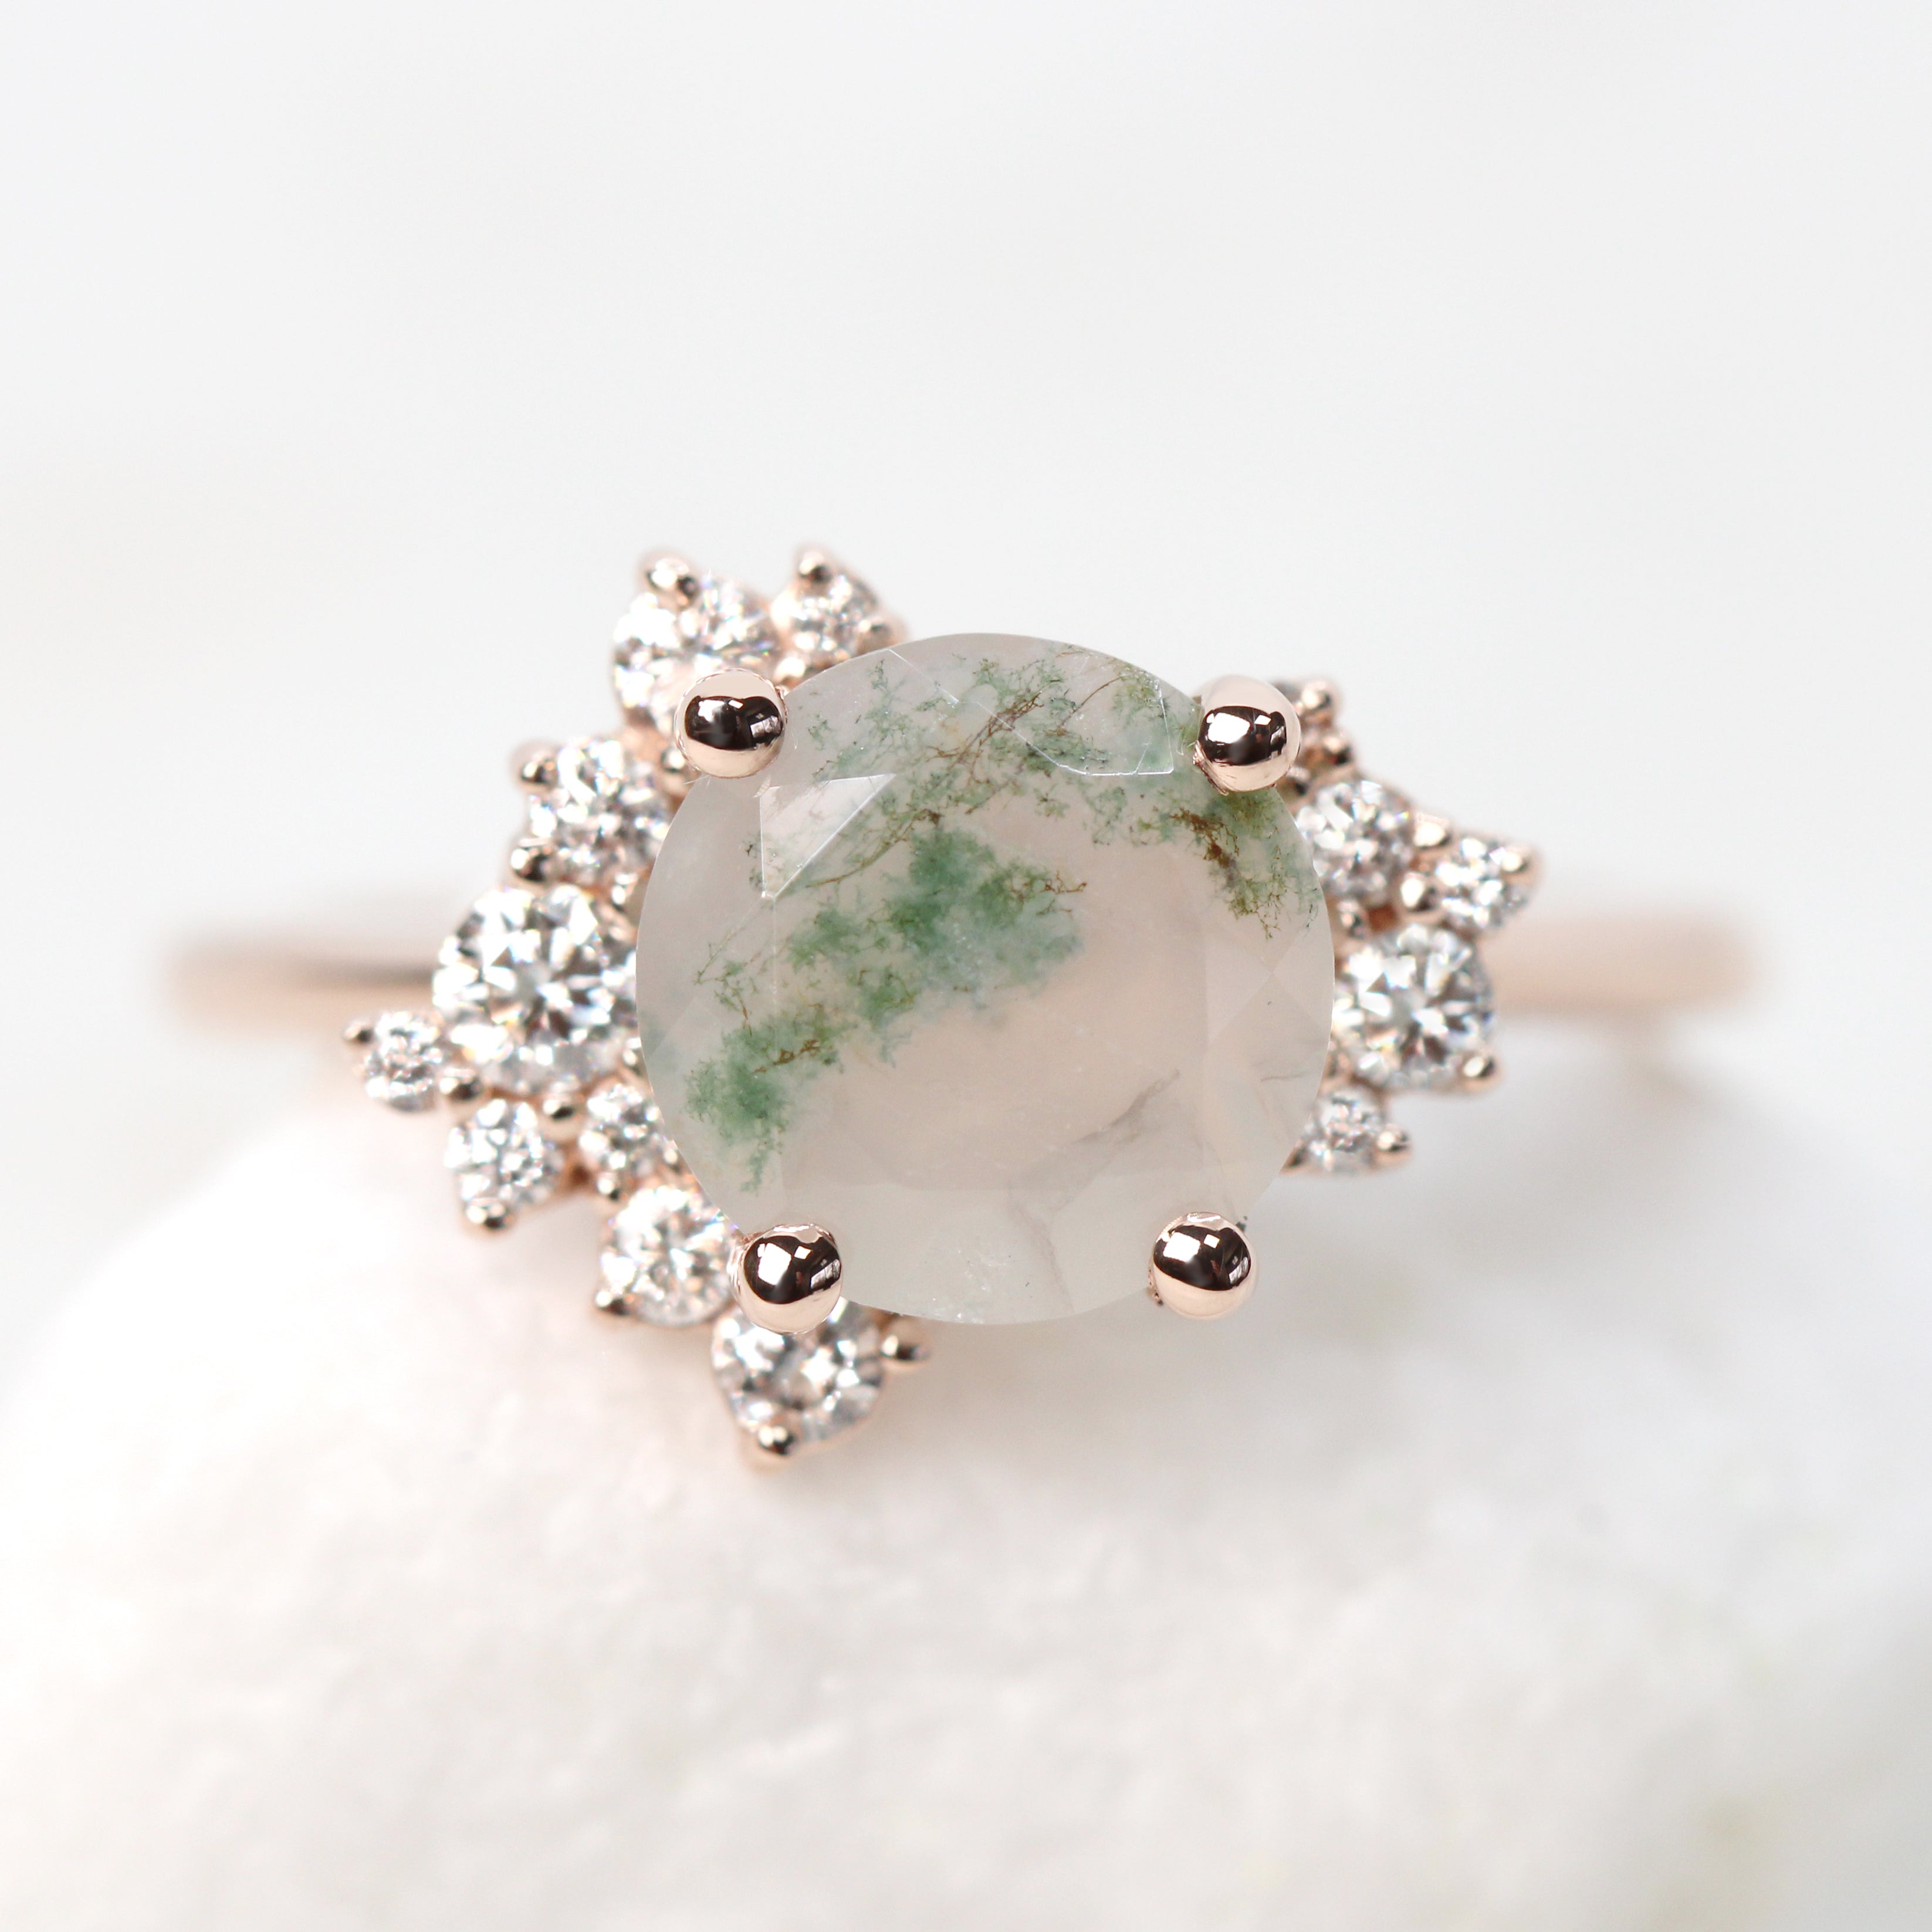 Custom Orion with 2 Carat Round Moss Agate and White Accent Diamonds in your Choice of 14K Gold - Made to Order - Each Stone is Unique - Midwinter Co. Alternative Bridal Rings and Modern Fine Jewelry